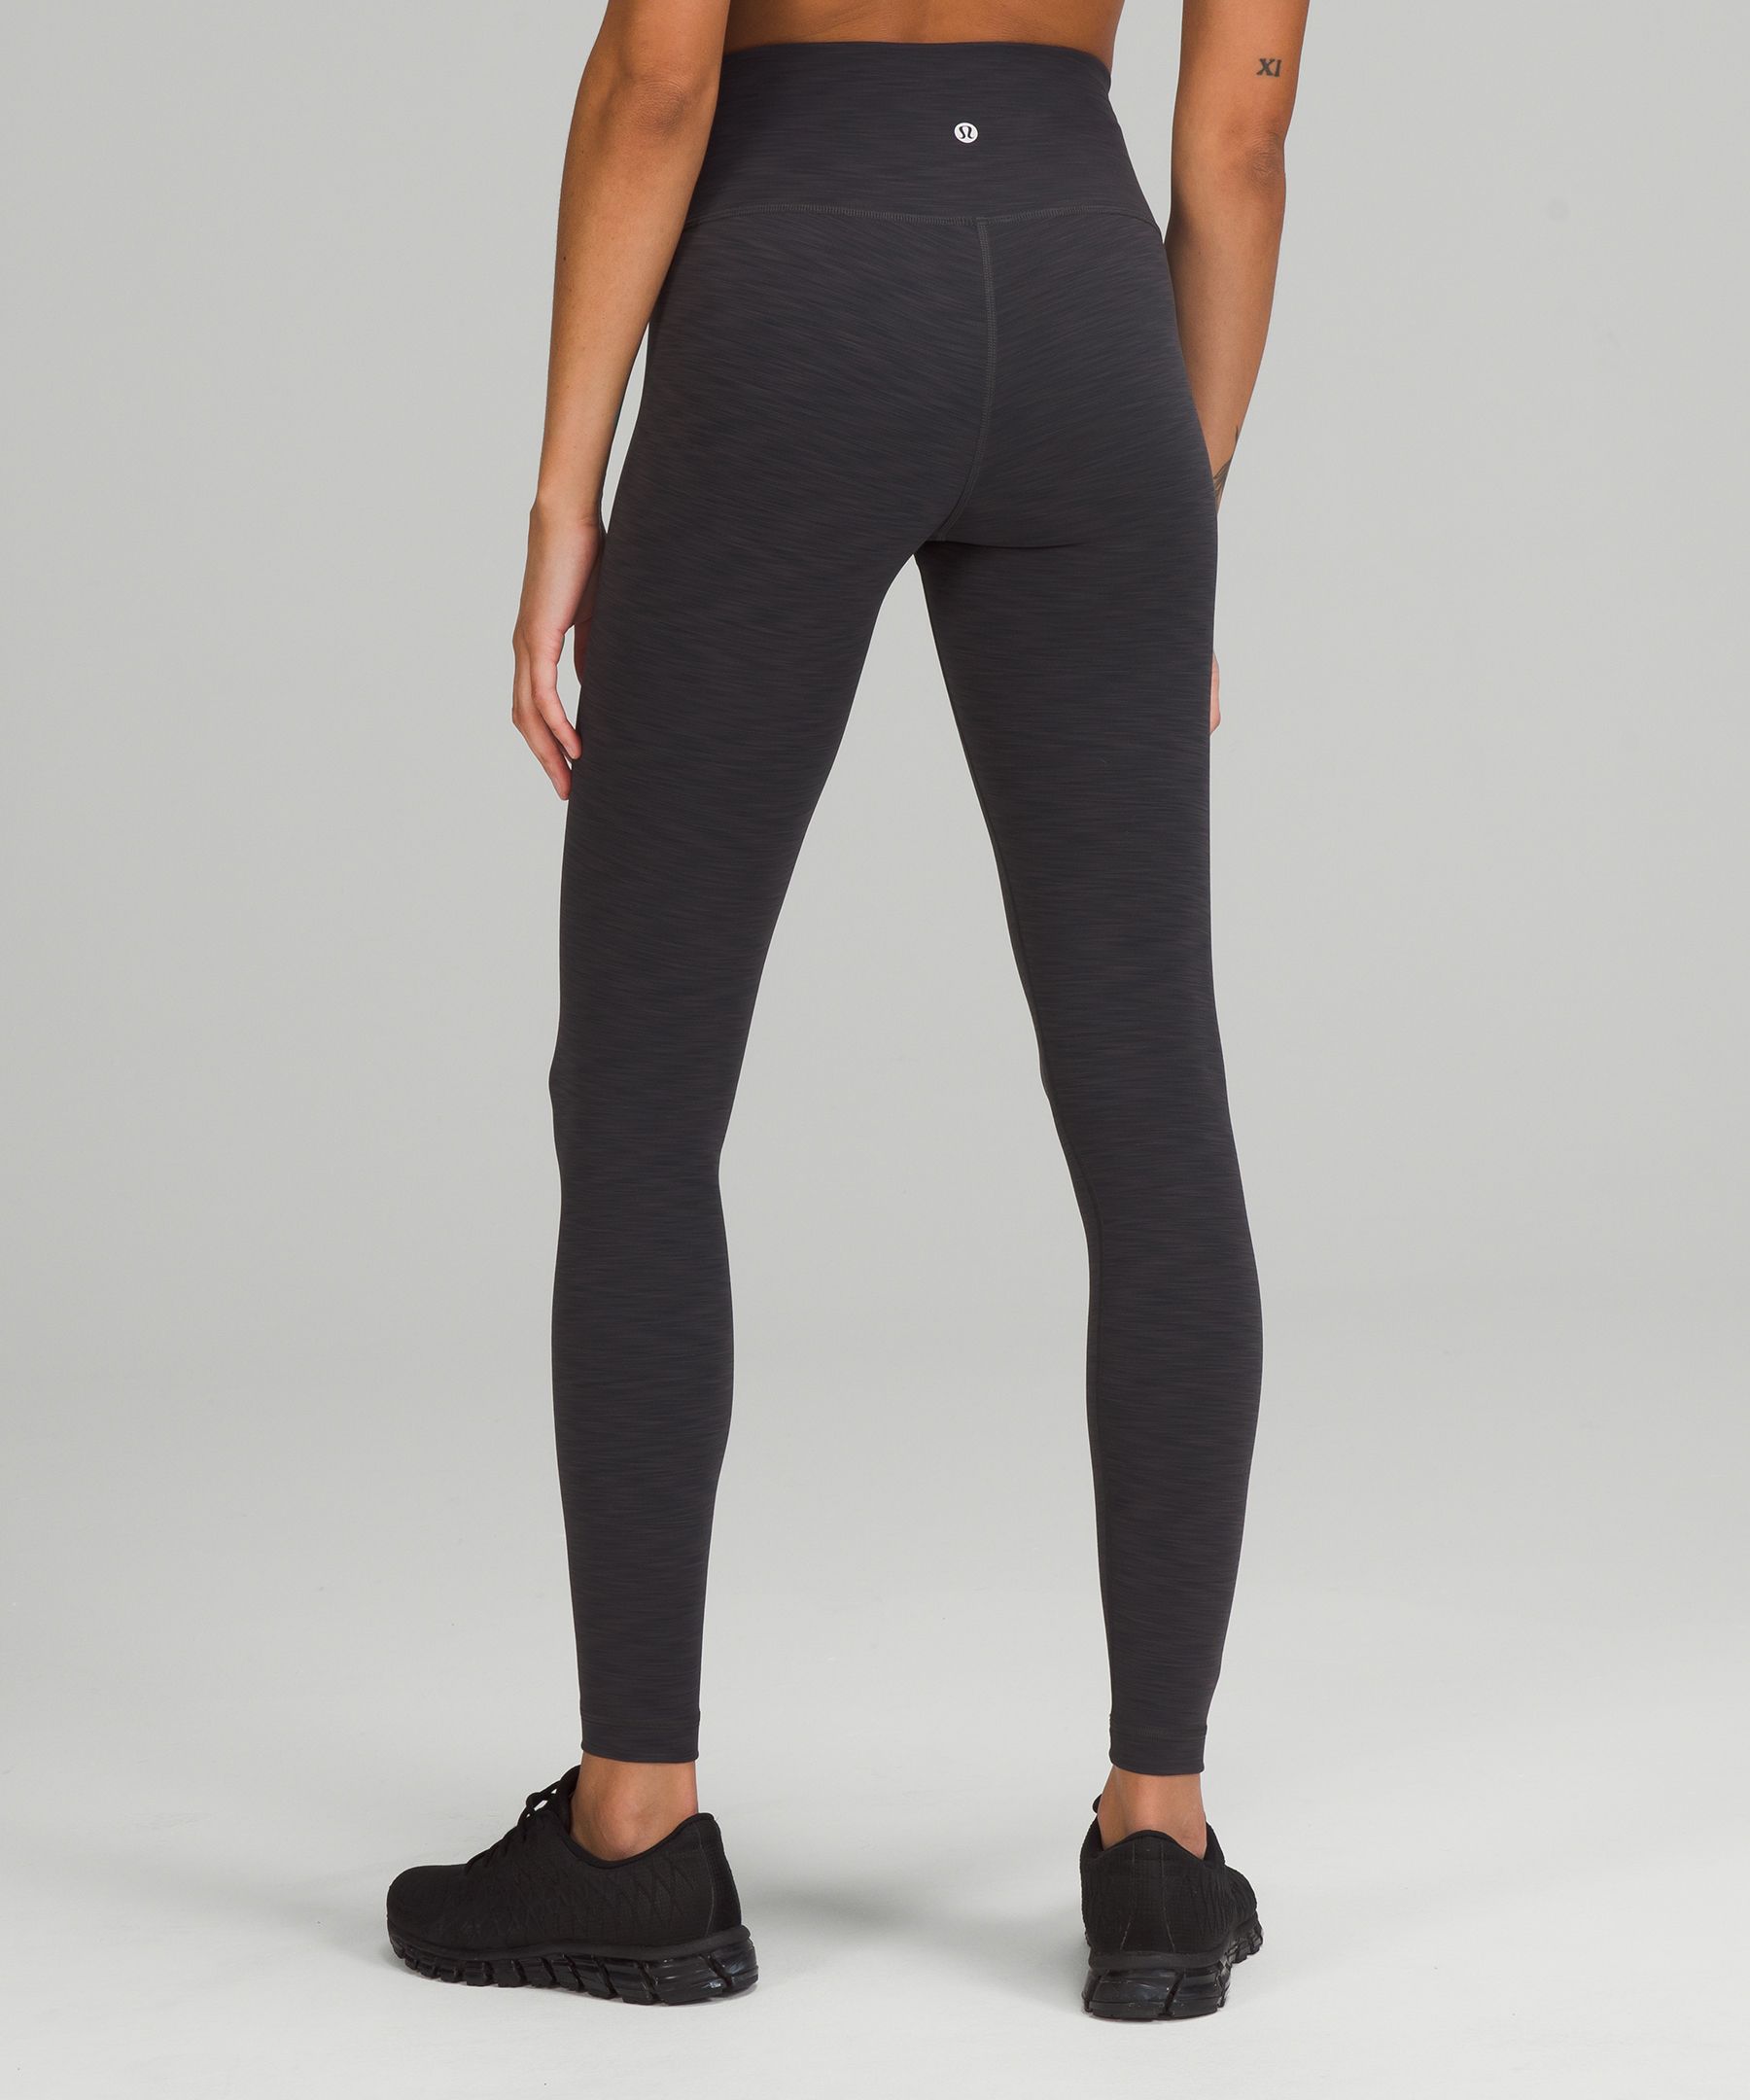 Lululemon Wunder Train High-Rise Tight 28 Black Size 6 .New With Tag.